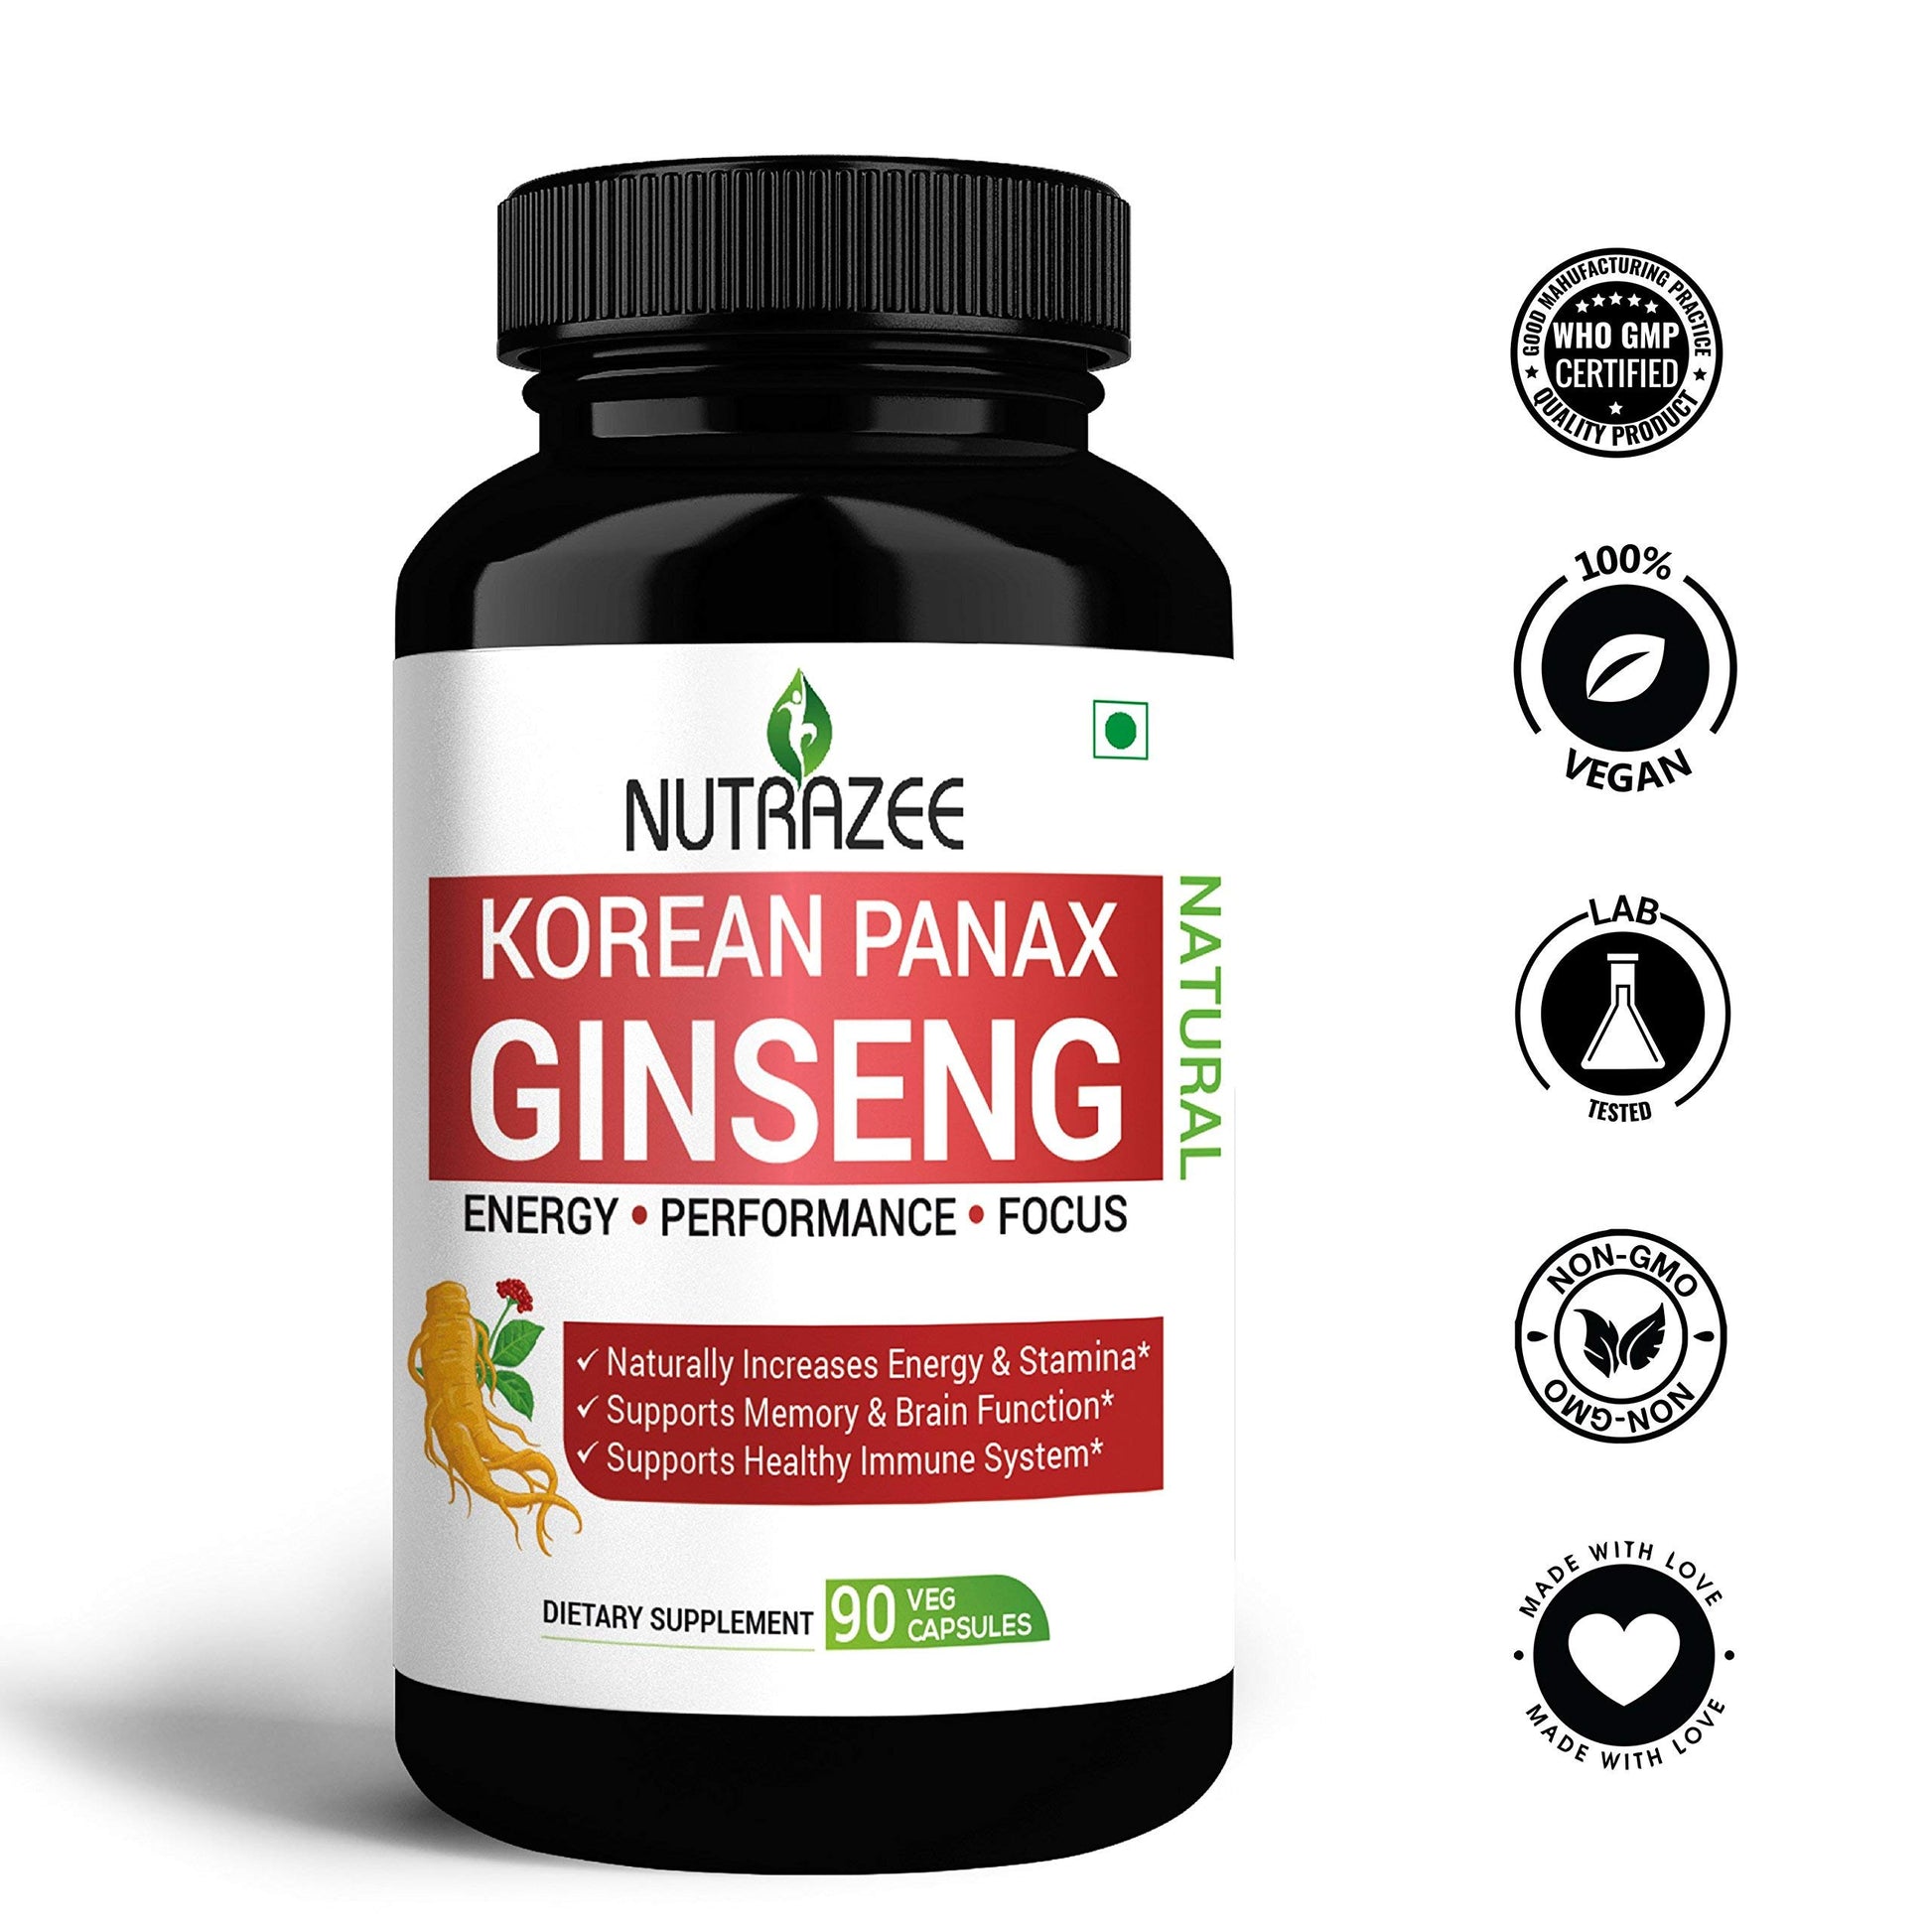 Nutrazee Korean Red Panax Ginseng 500mg - 90 Vegan Capsules Root Extract Powder Supplement for Energy Performance Focus and Stress for Men & Women